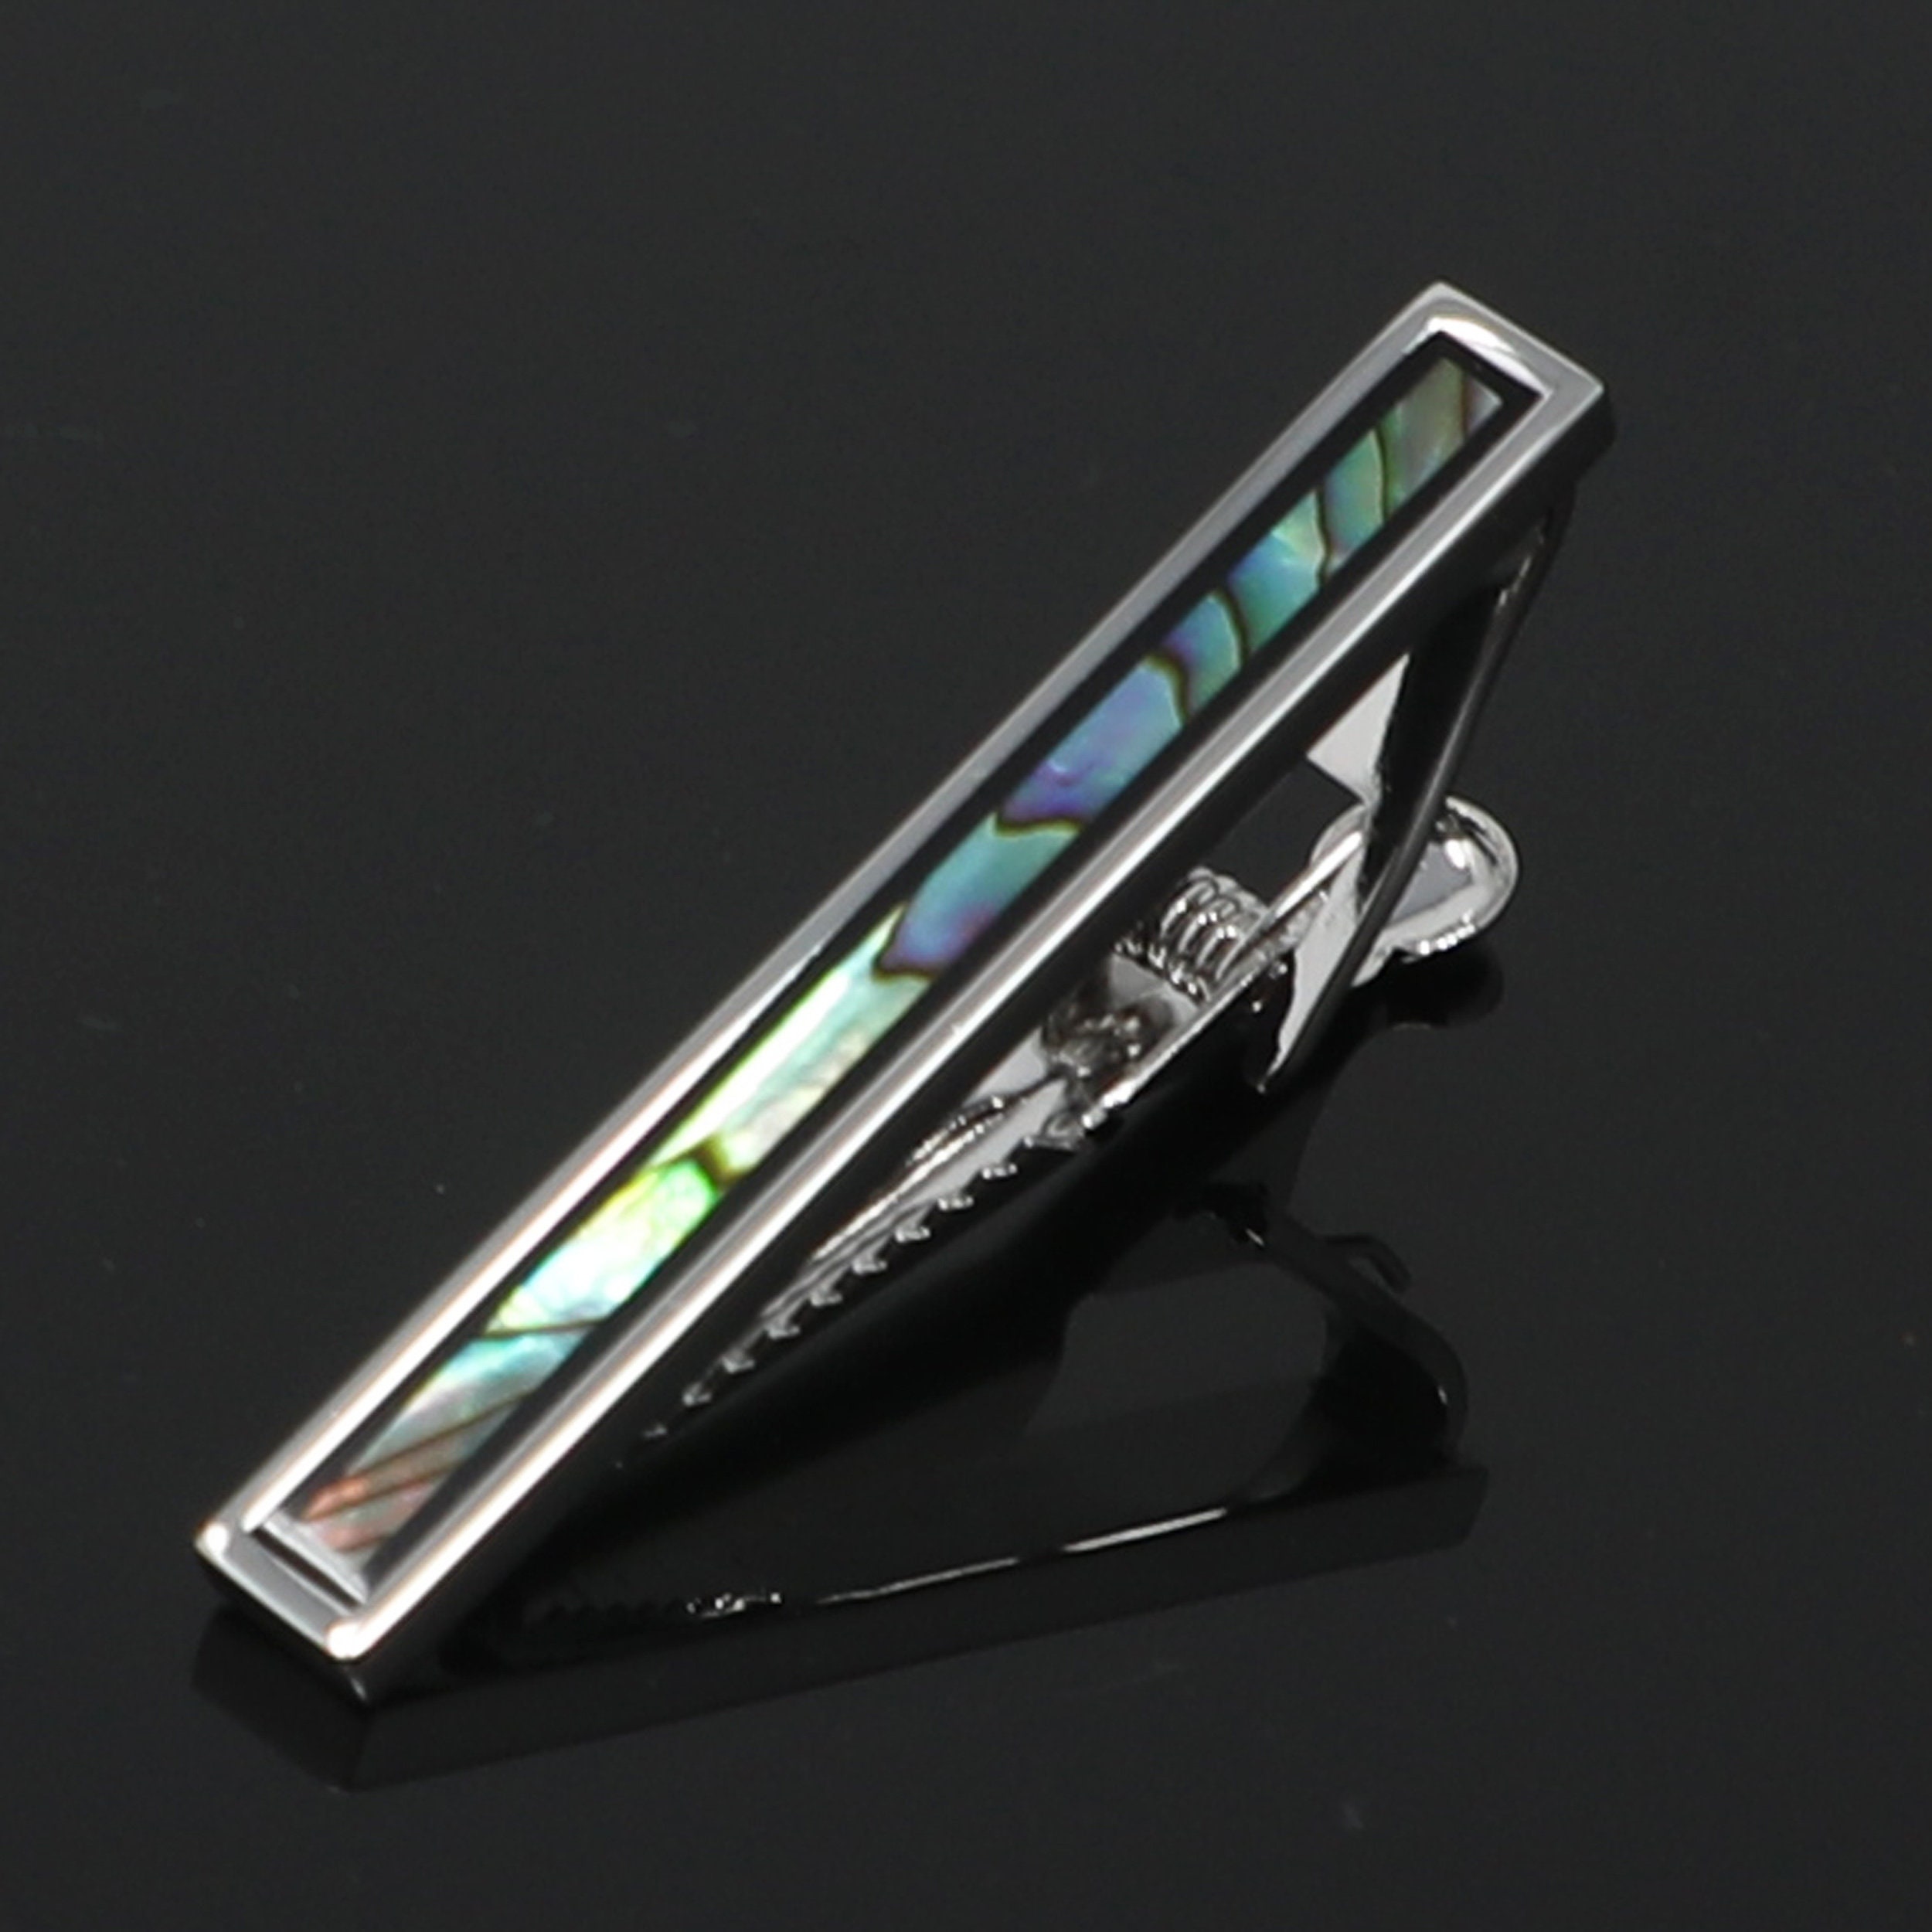 Genuine Onyx and Abalone Center Men Tie Clip Stone Tie Bar - Etsy